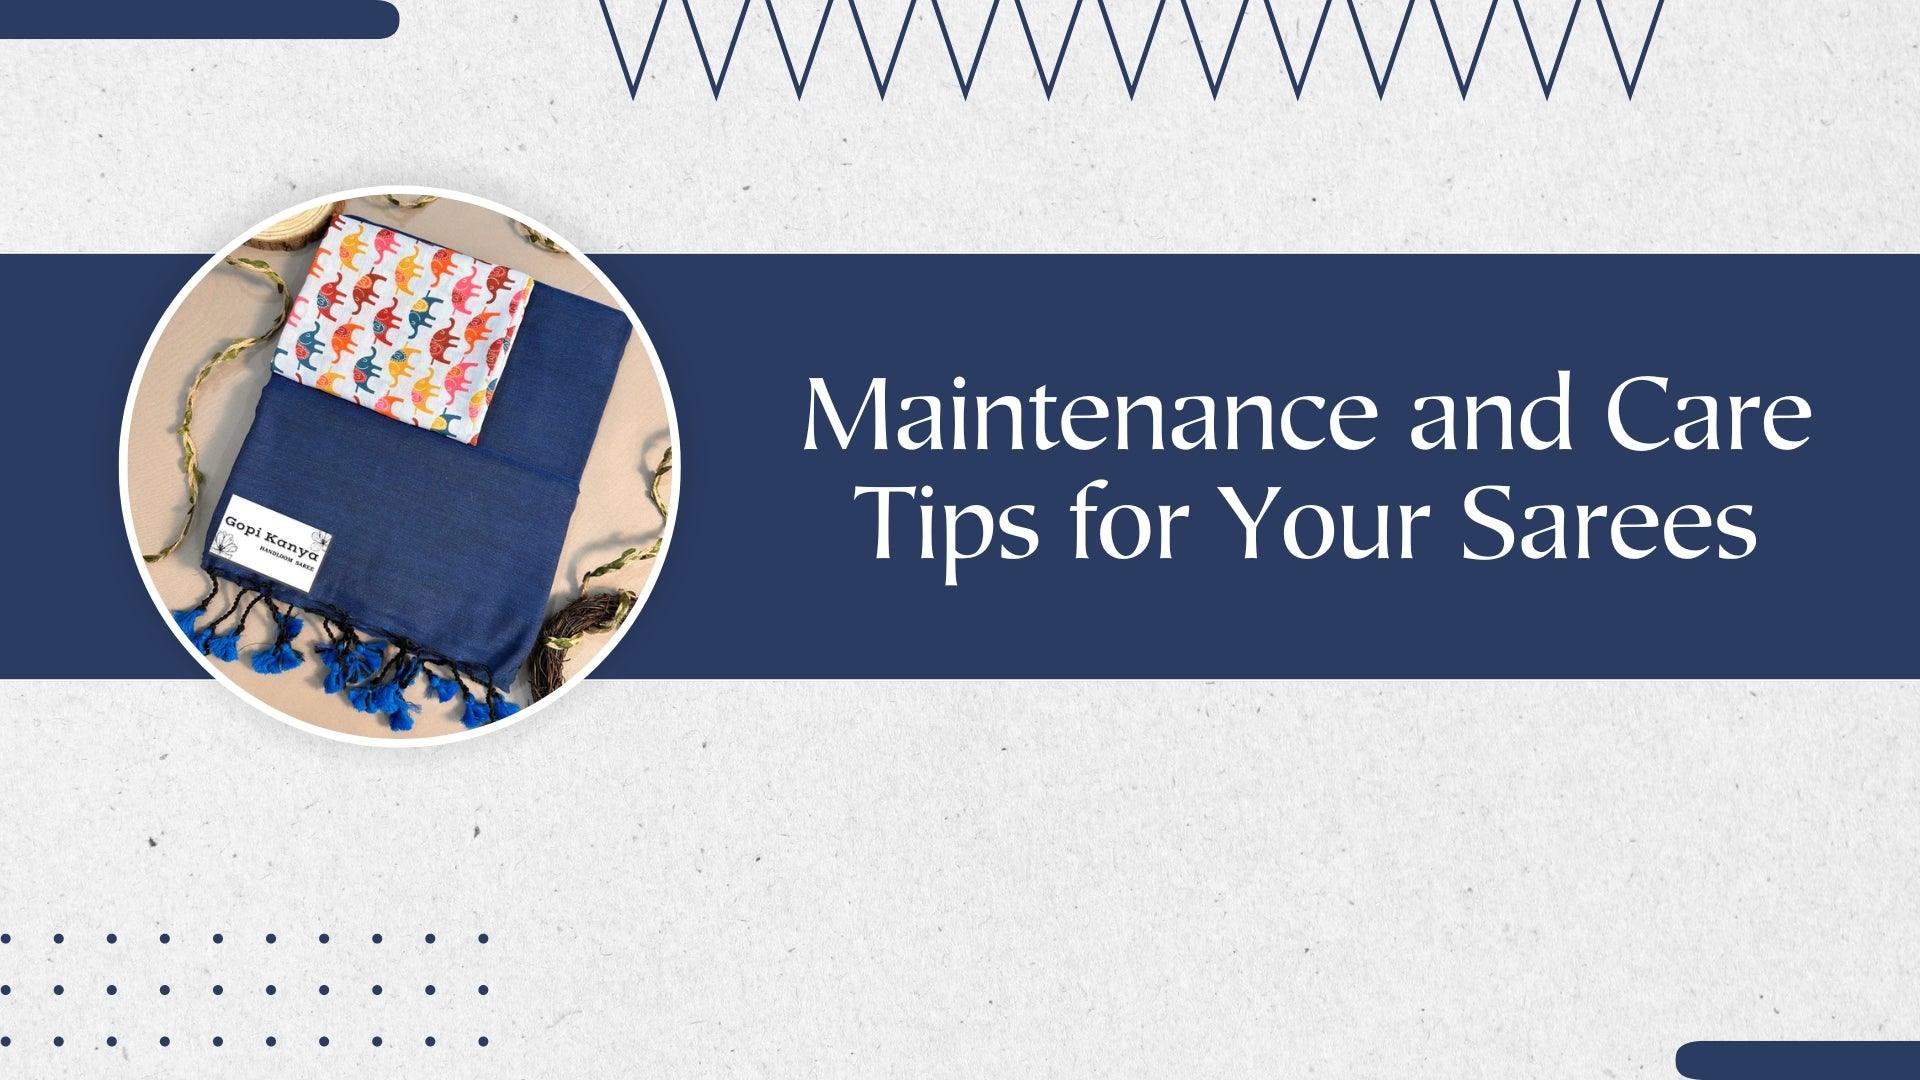 Maintenance and Care Tips for Your Sarees